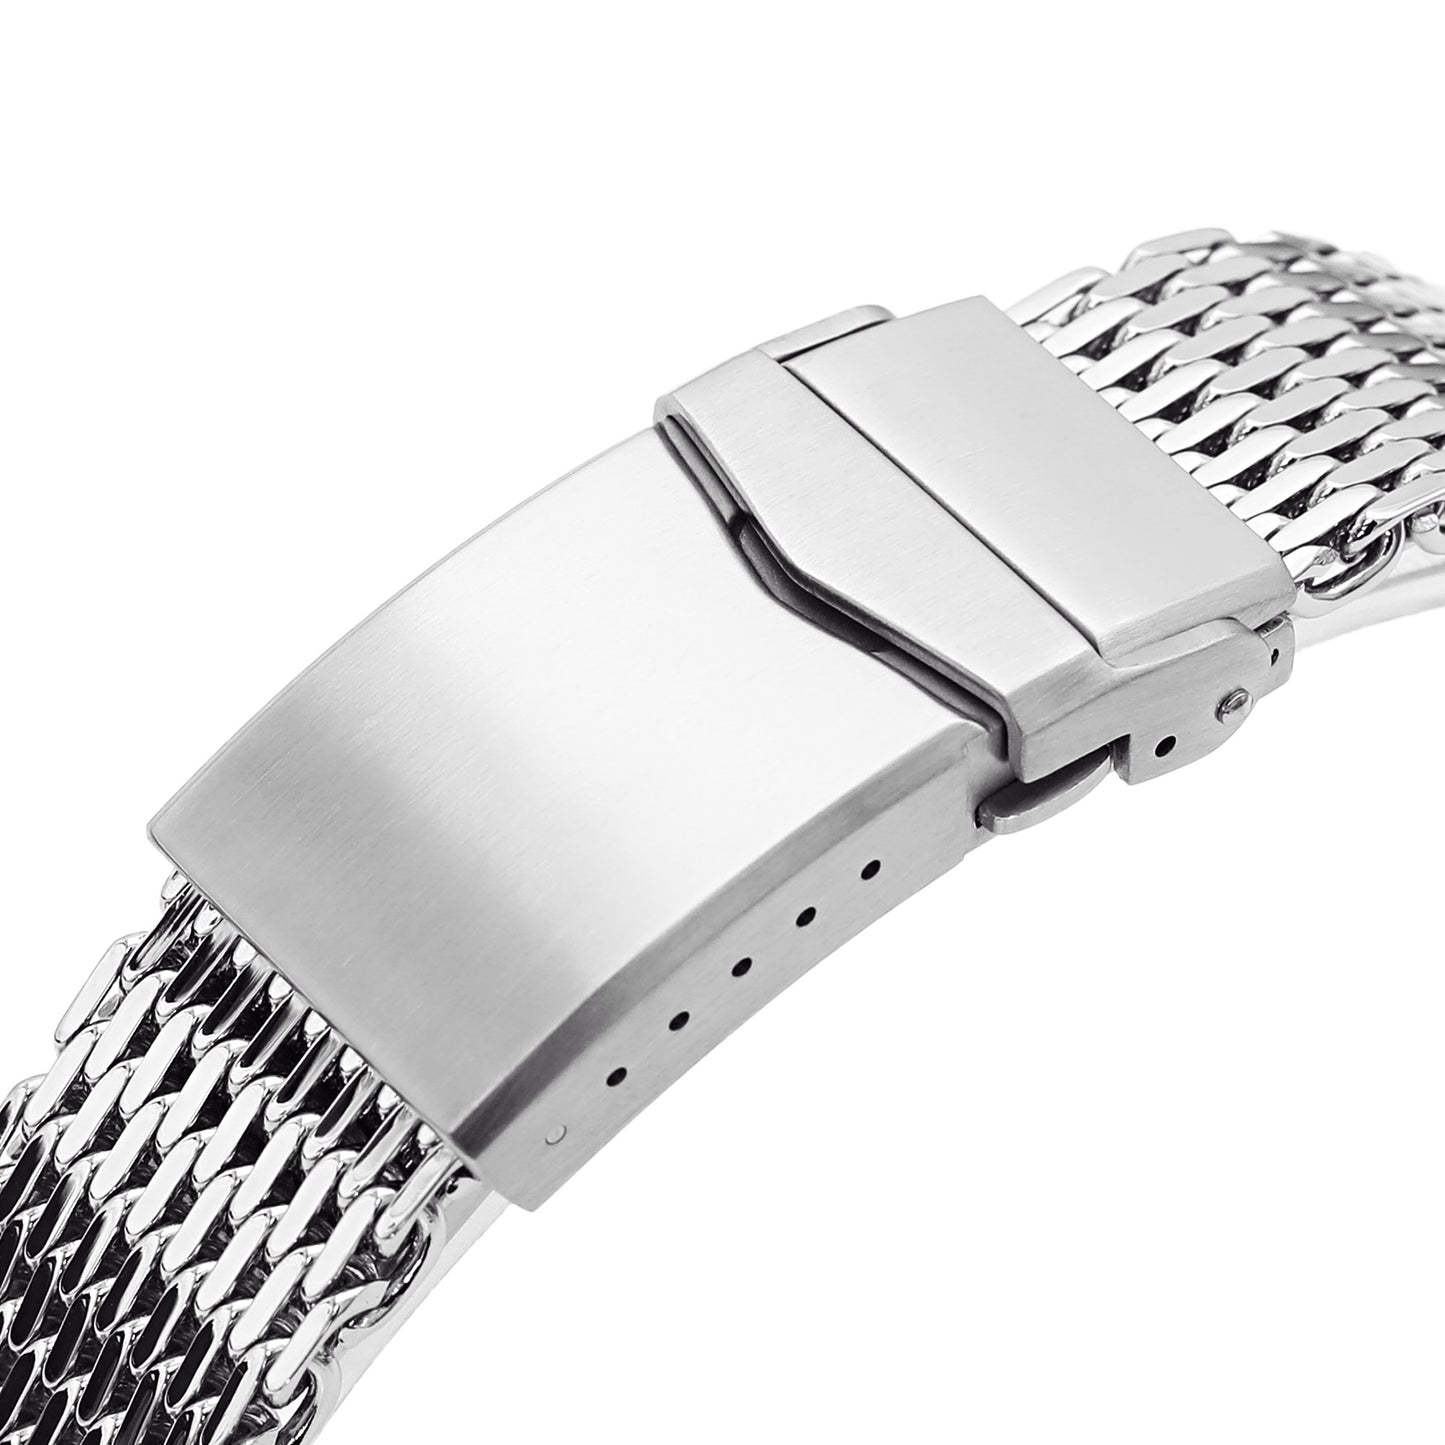 22mm Polished Tapered Winghead "SHARK" Mesh watch band, V-Clasp